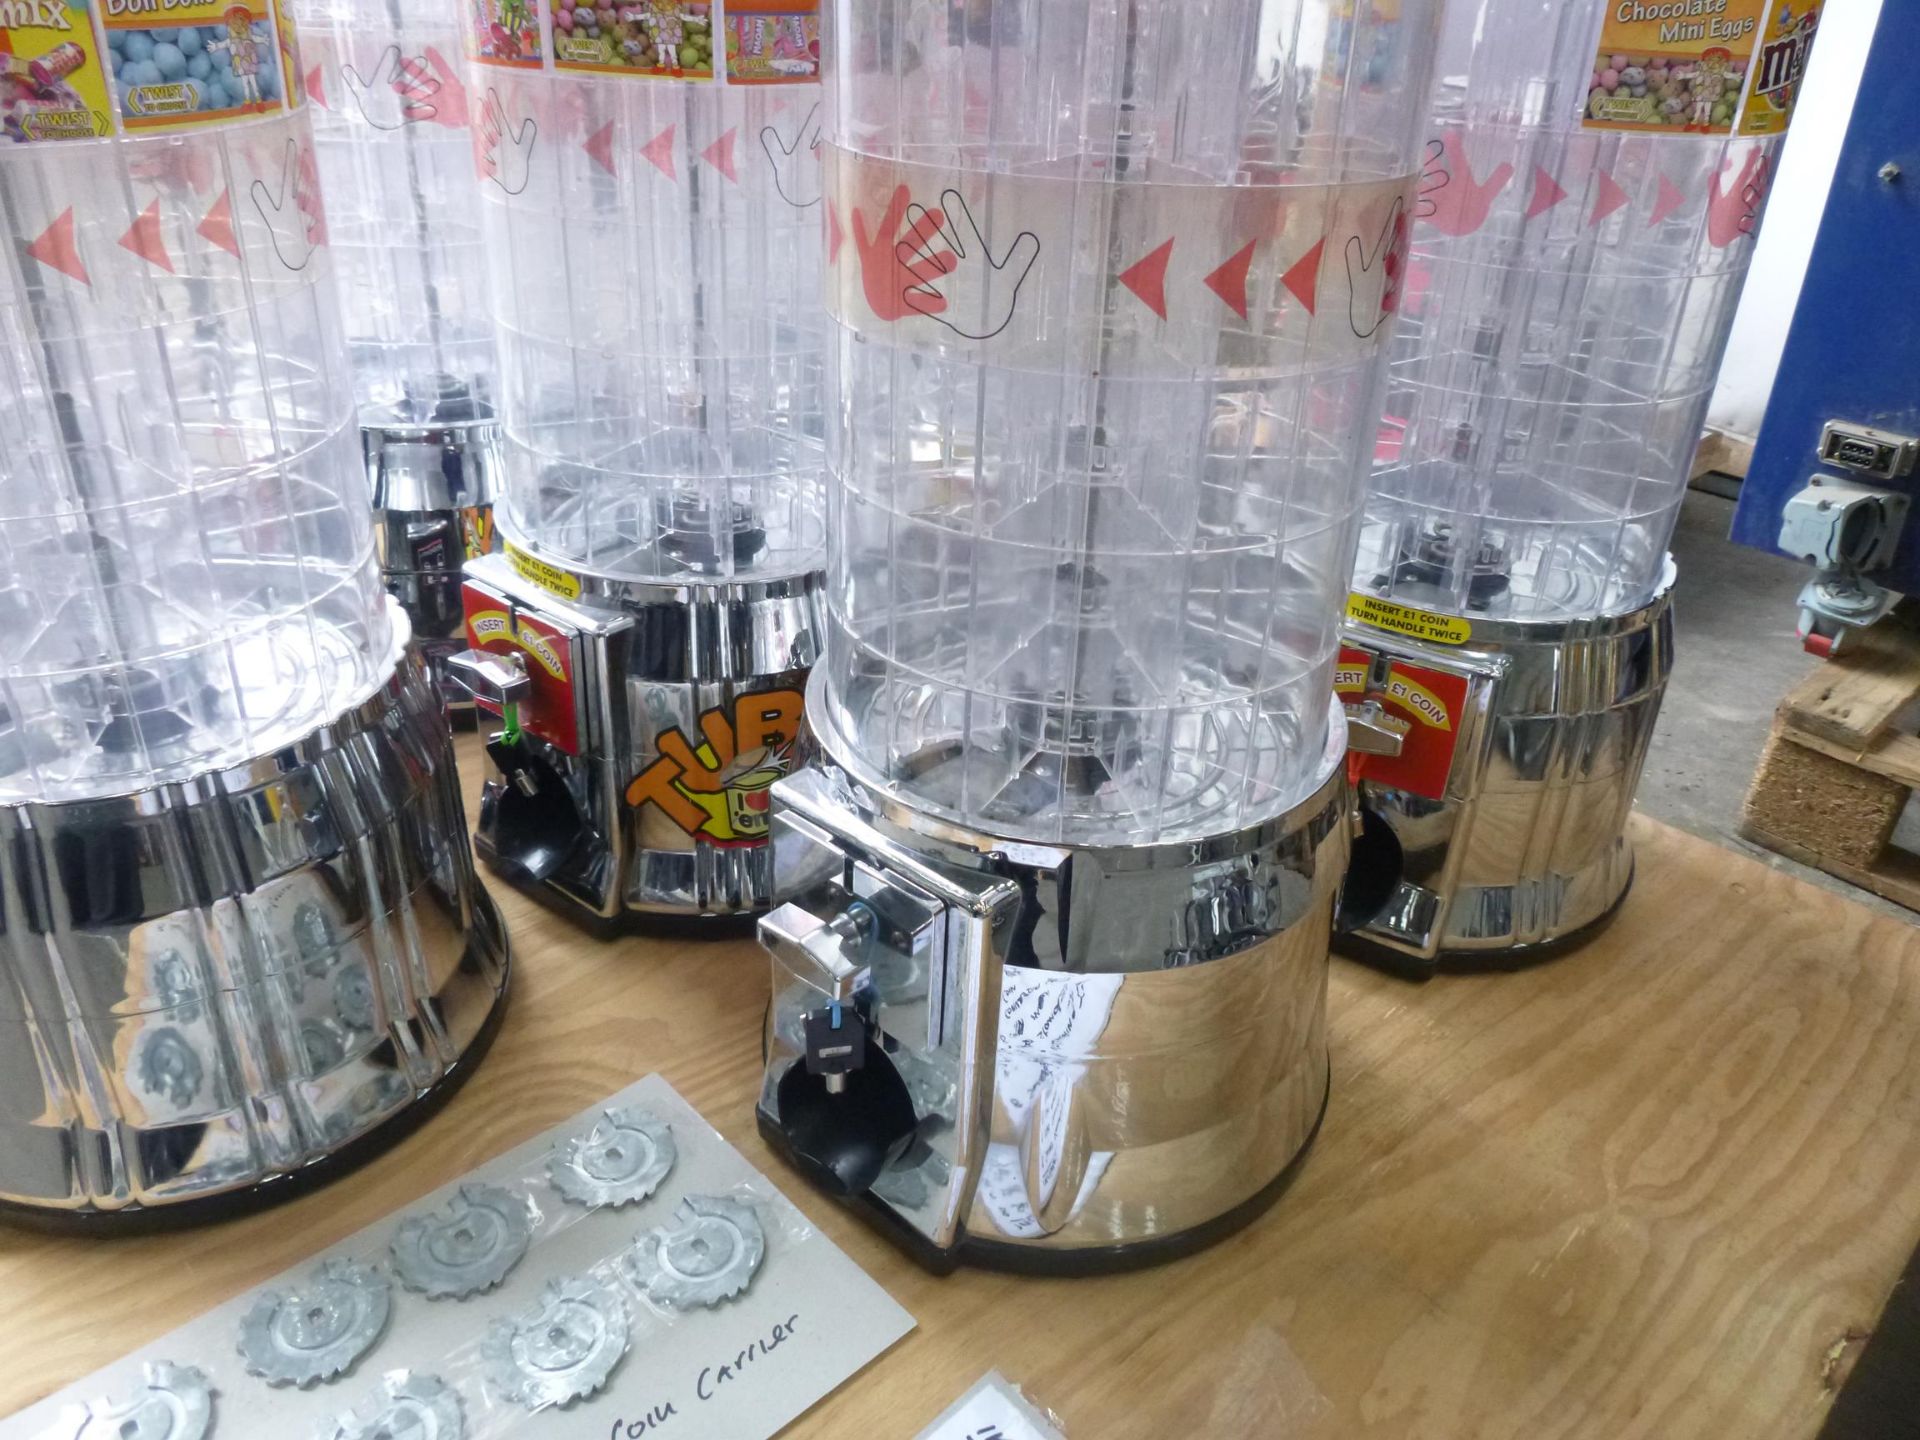 8 x Sweet Vending Towers includes 8 x Vending Towers, 8 x Steel Stands, 8 x Coin Mech Plates for - Image 6 of 10